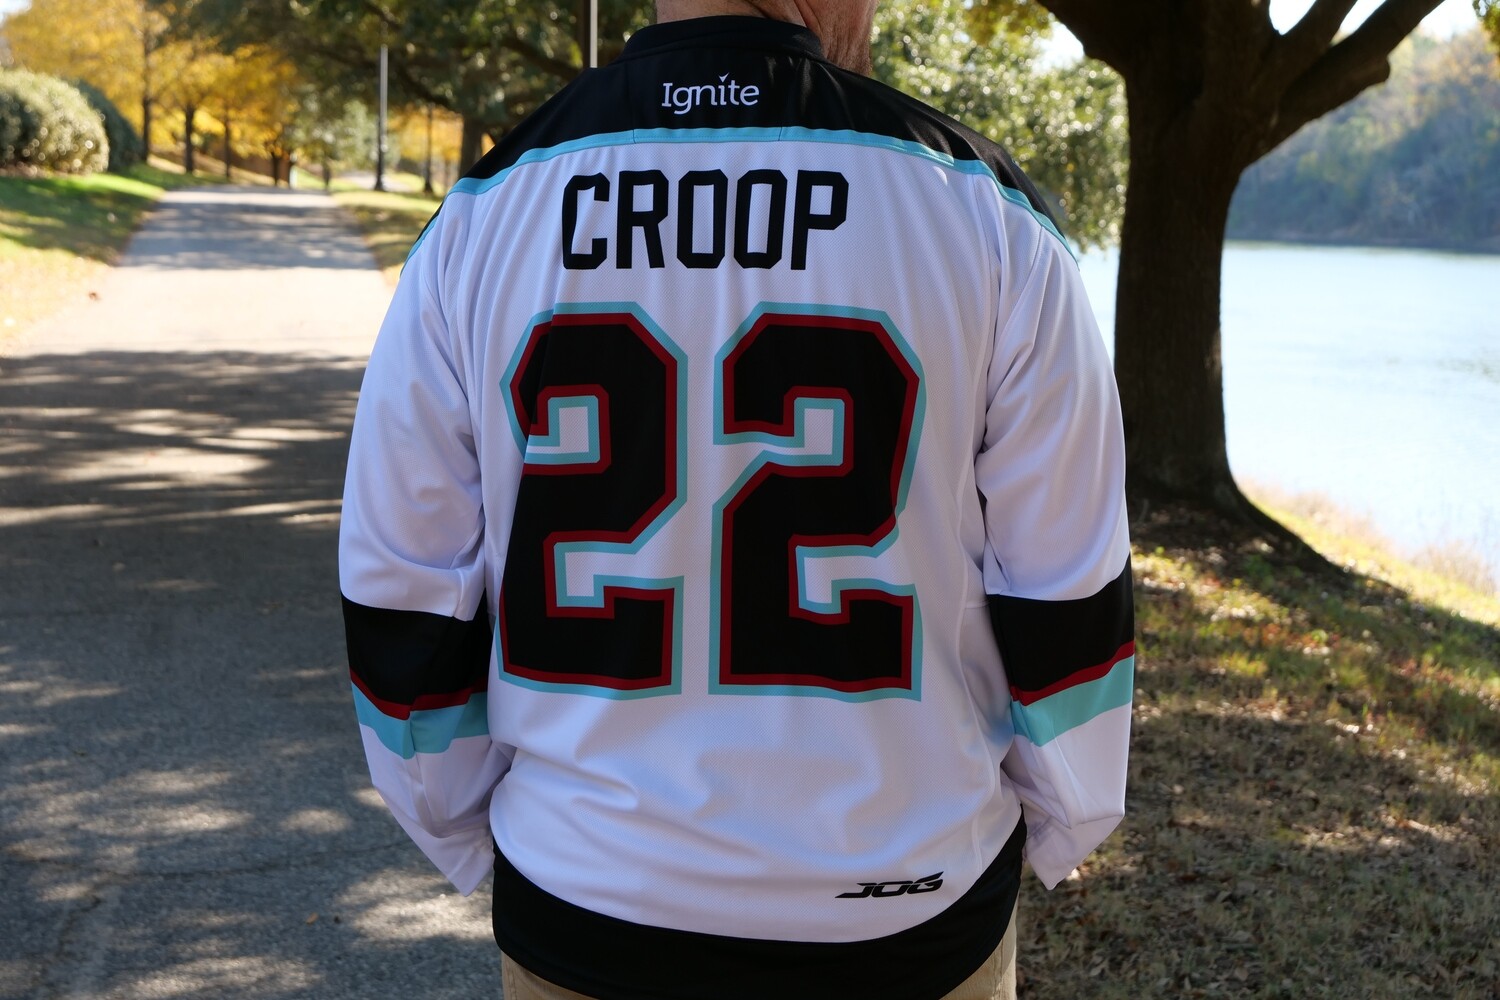 Replica 2023-24 Adult White Jersey - Croop